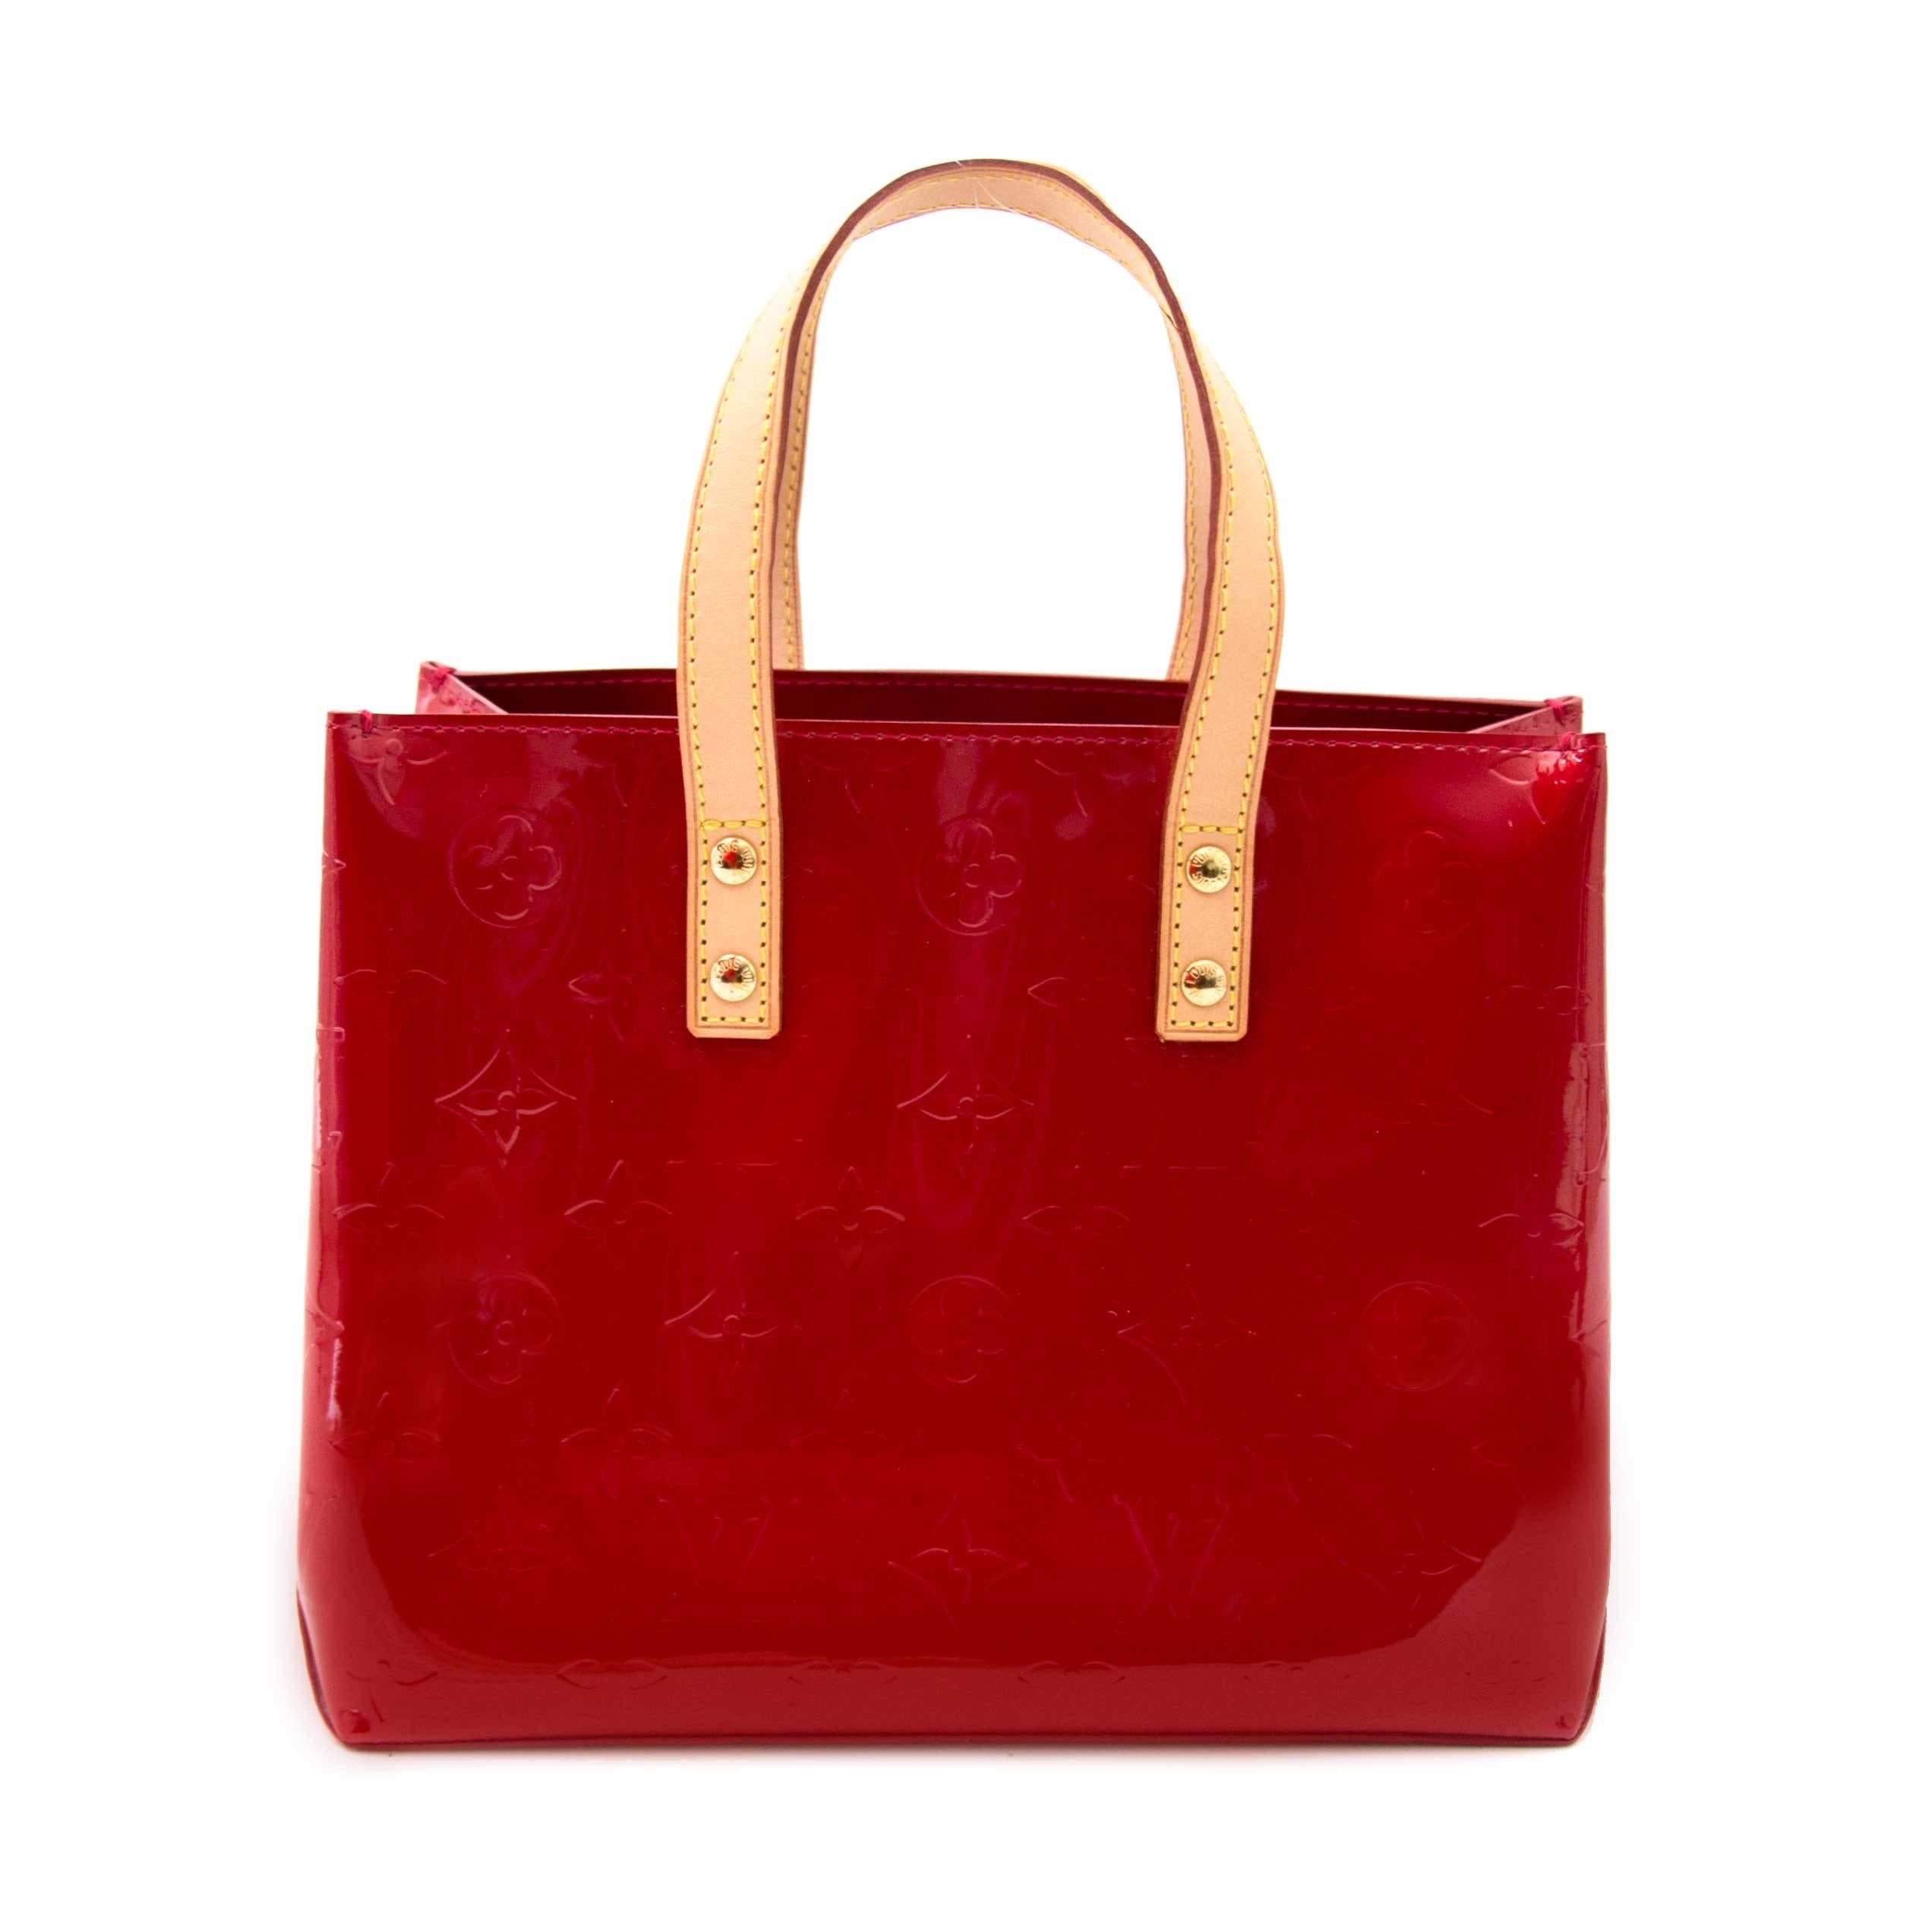 In excellent condition

Louis Vuitton Mini Reade Red Vernis Leather Tote Bag

This beautiful Louis Vuitton bag comes in red vernis monogram embossed patent leather with leather handles.

The interior is lined with canvas and comes with one zipper